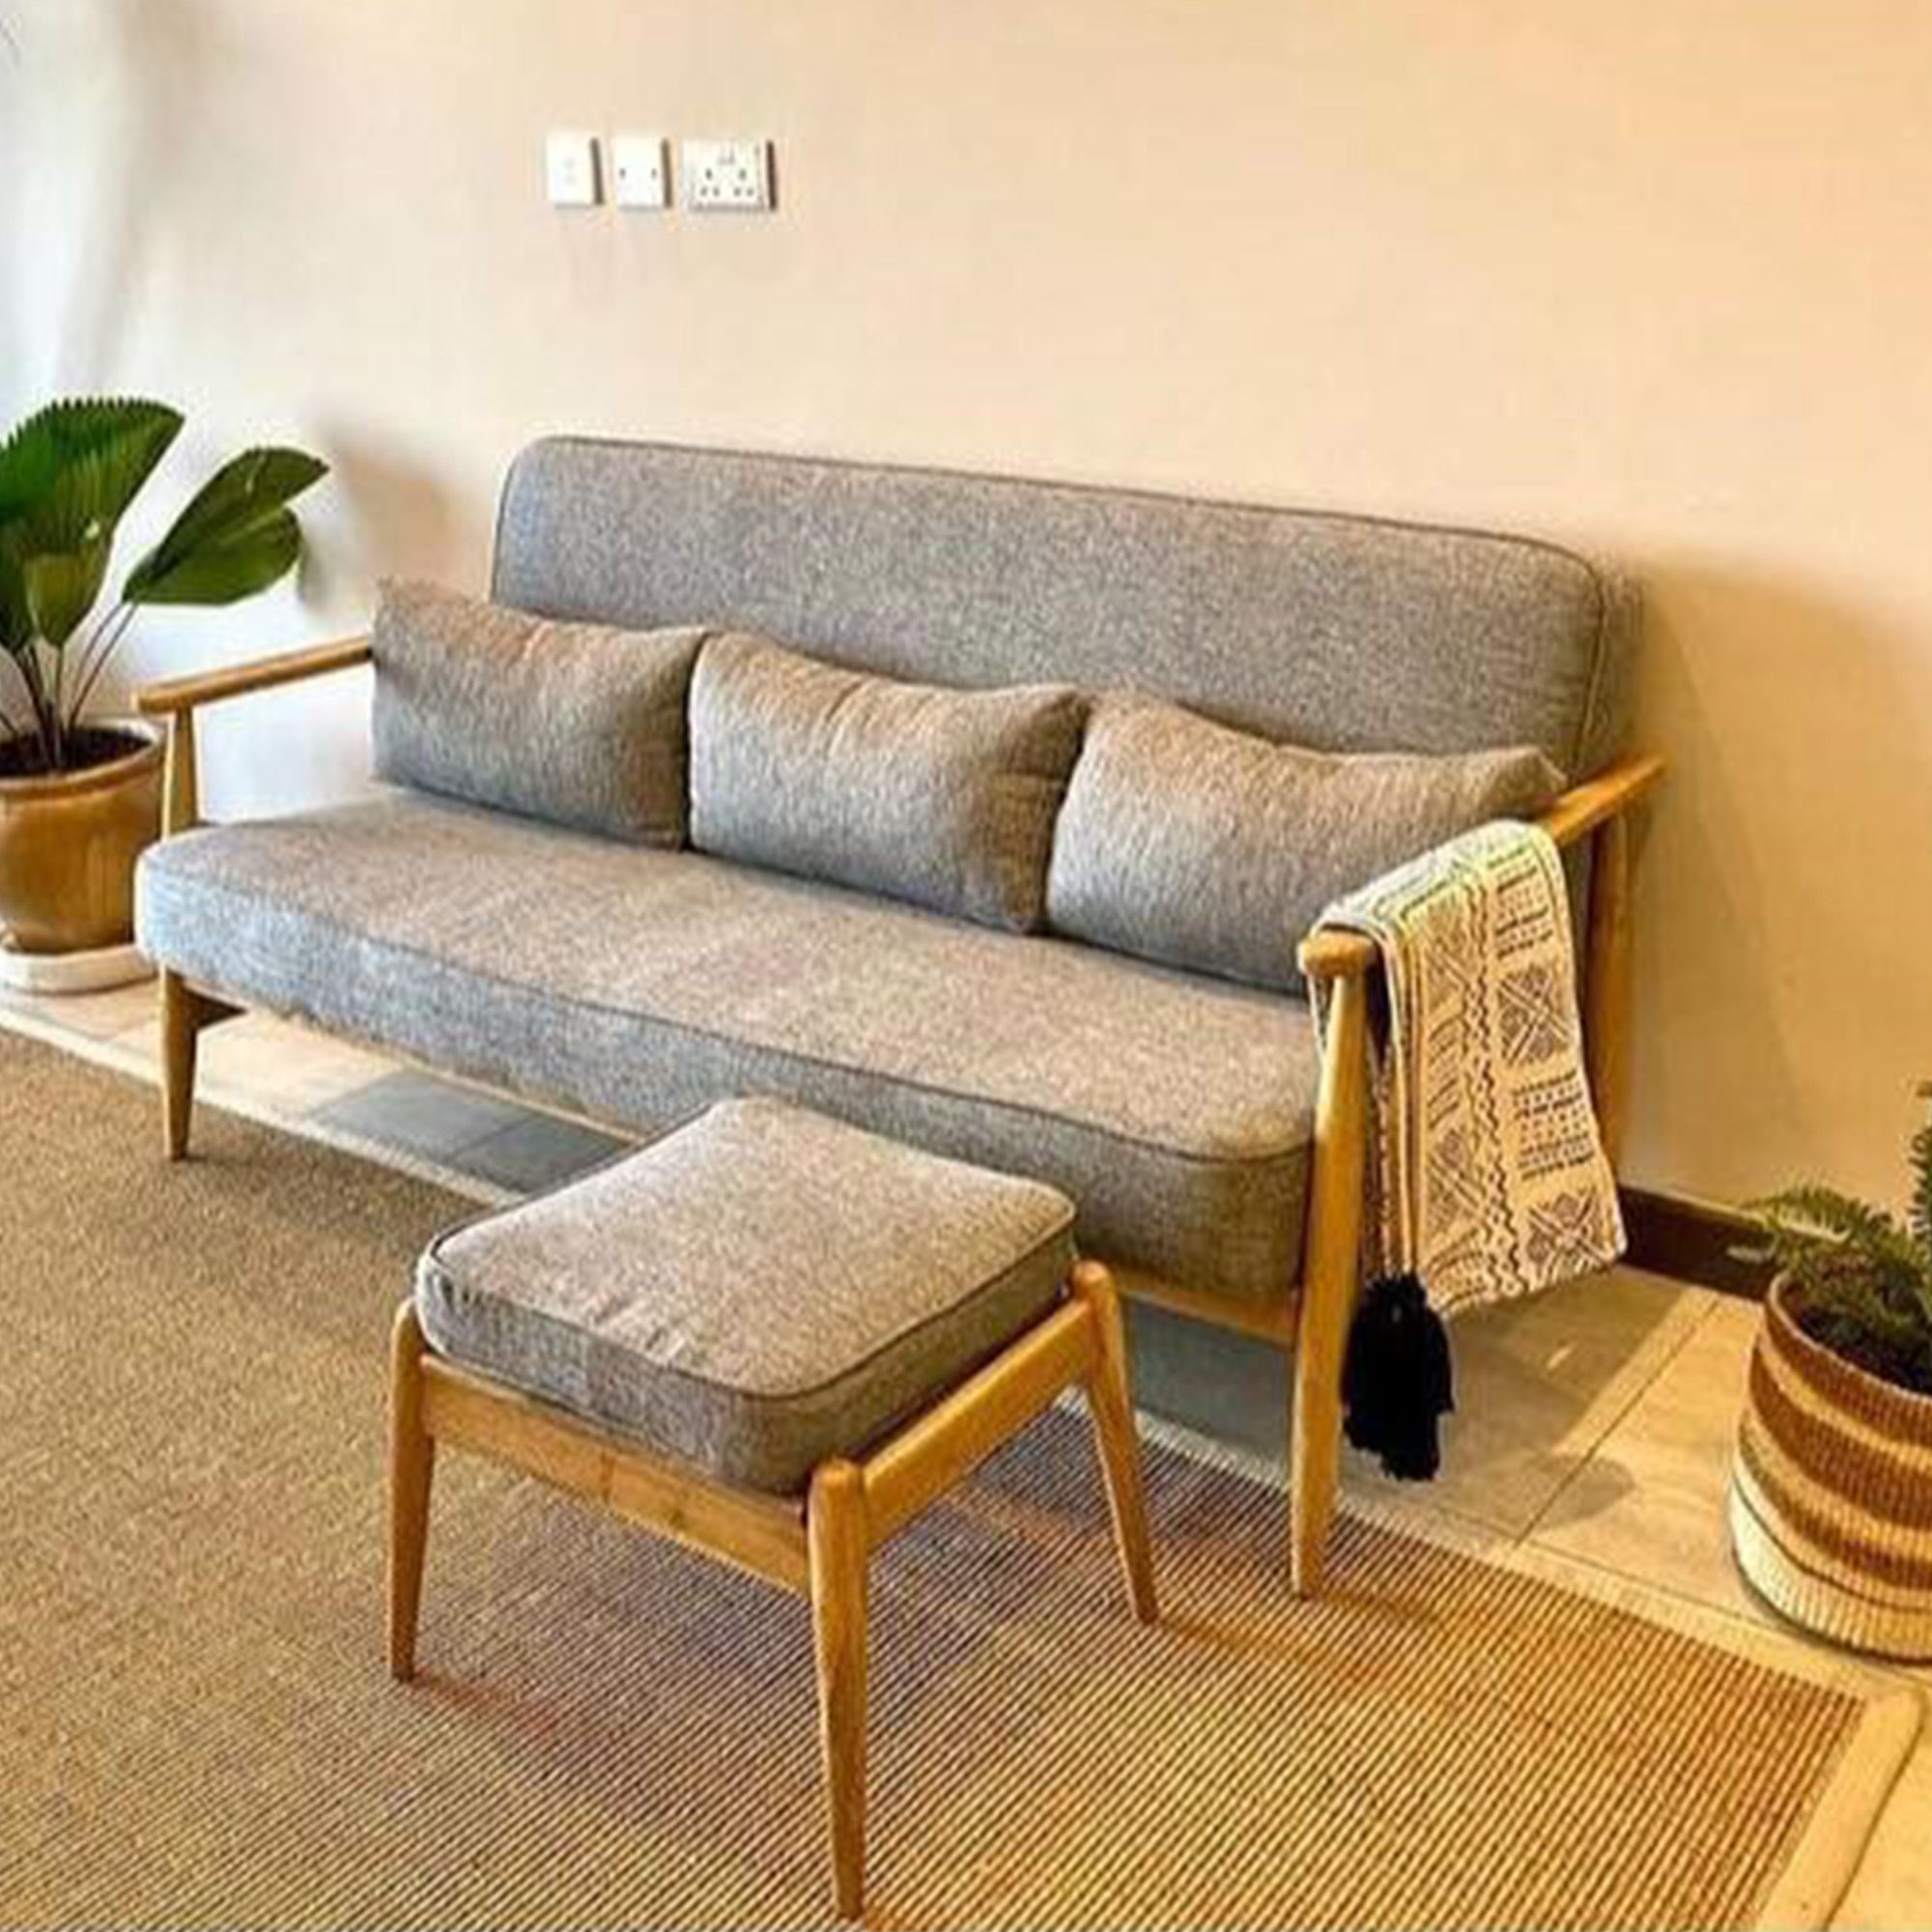 3 Seater Mid Century Sofa – Workshop | Nairobi Intended For Mid Century 3 Seat Couches (View 4 of 15)